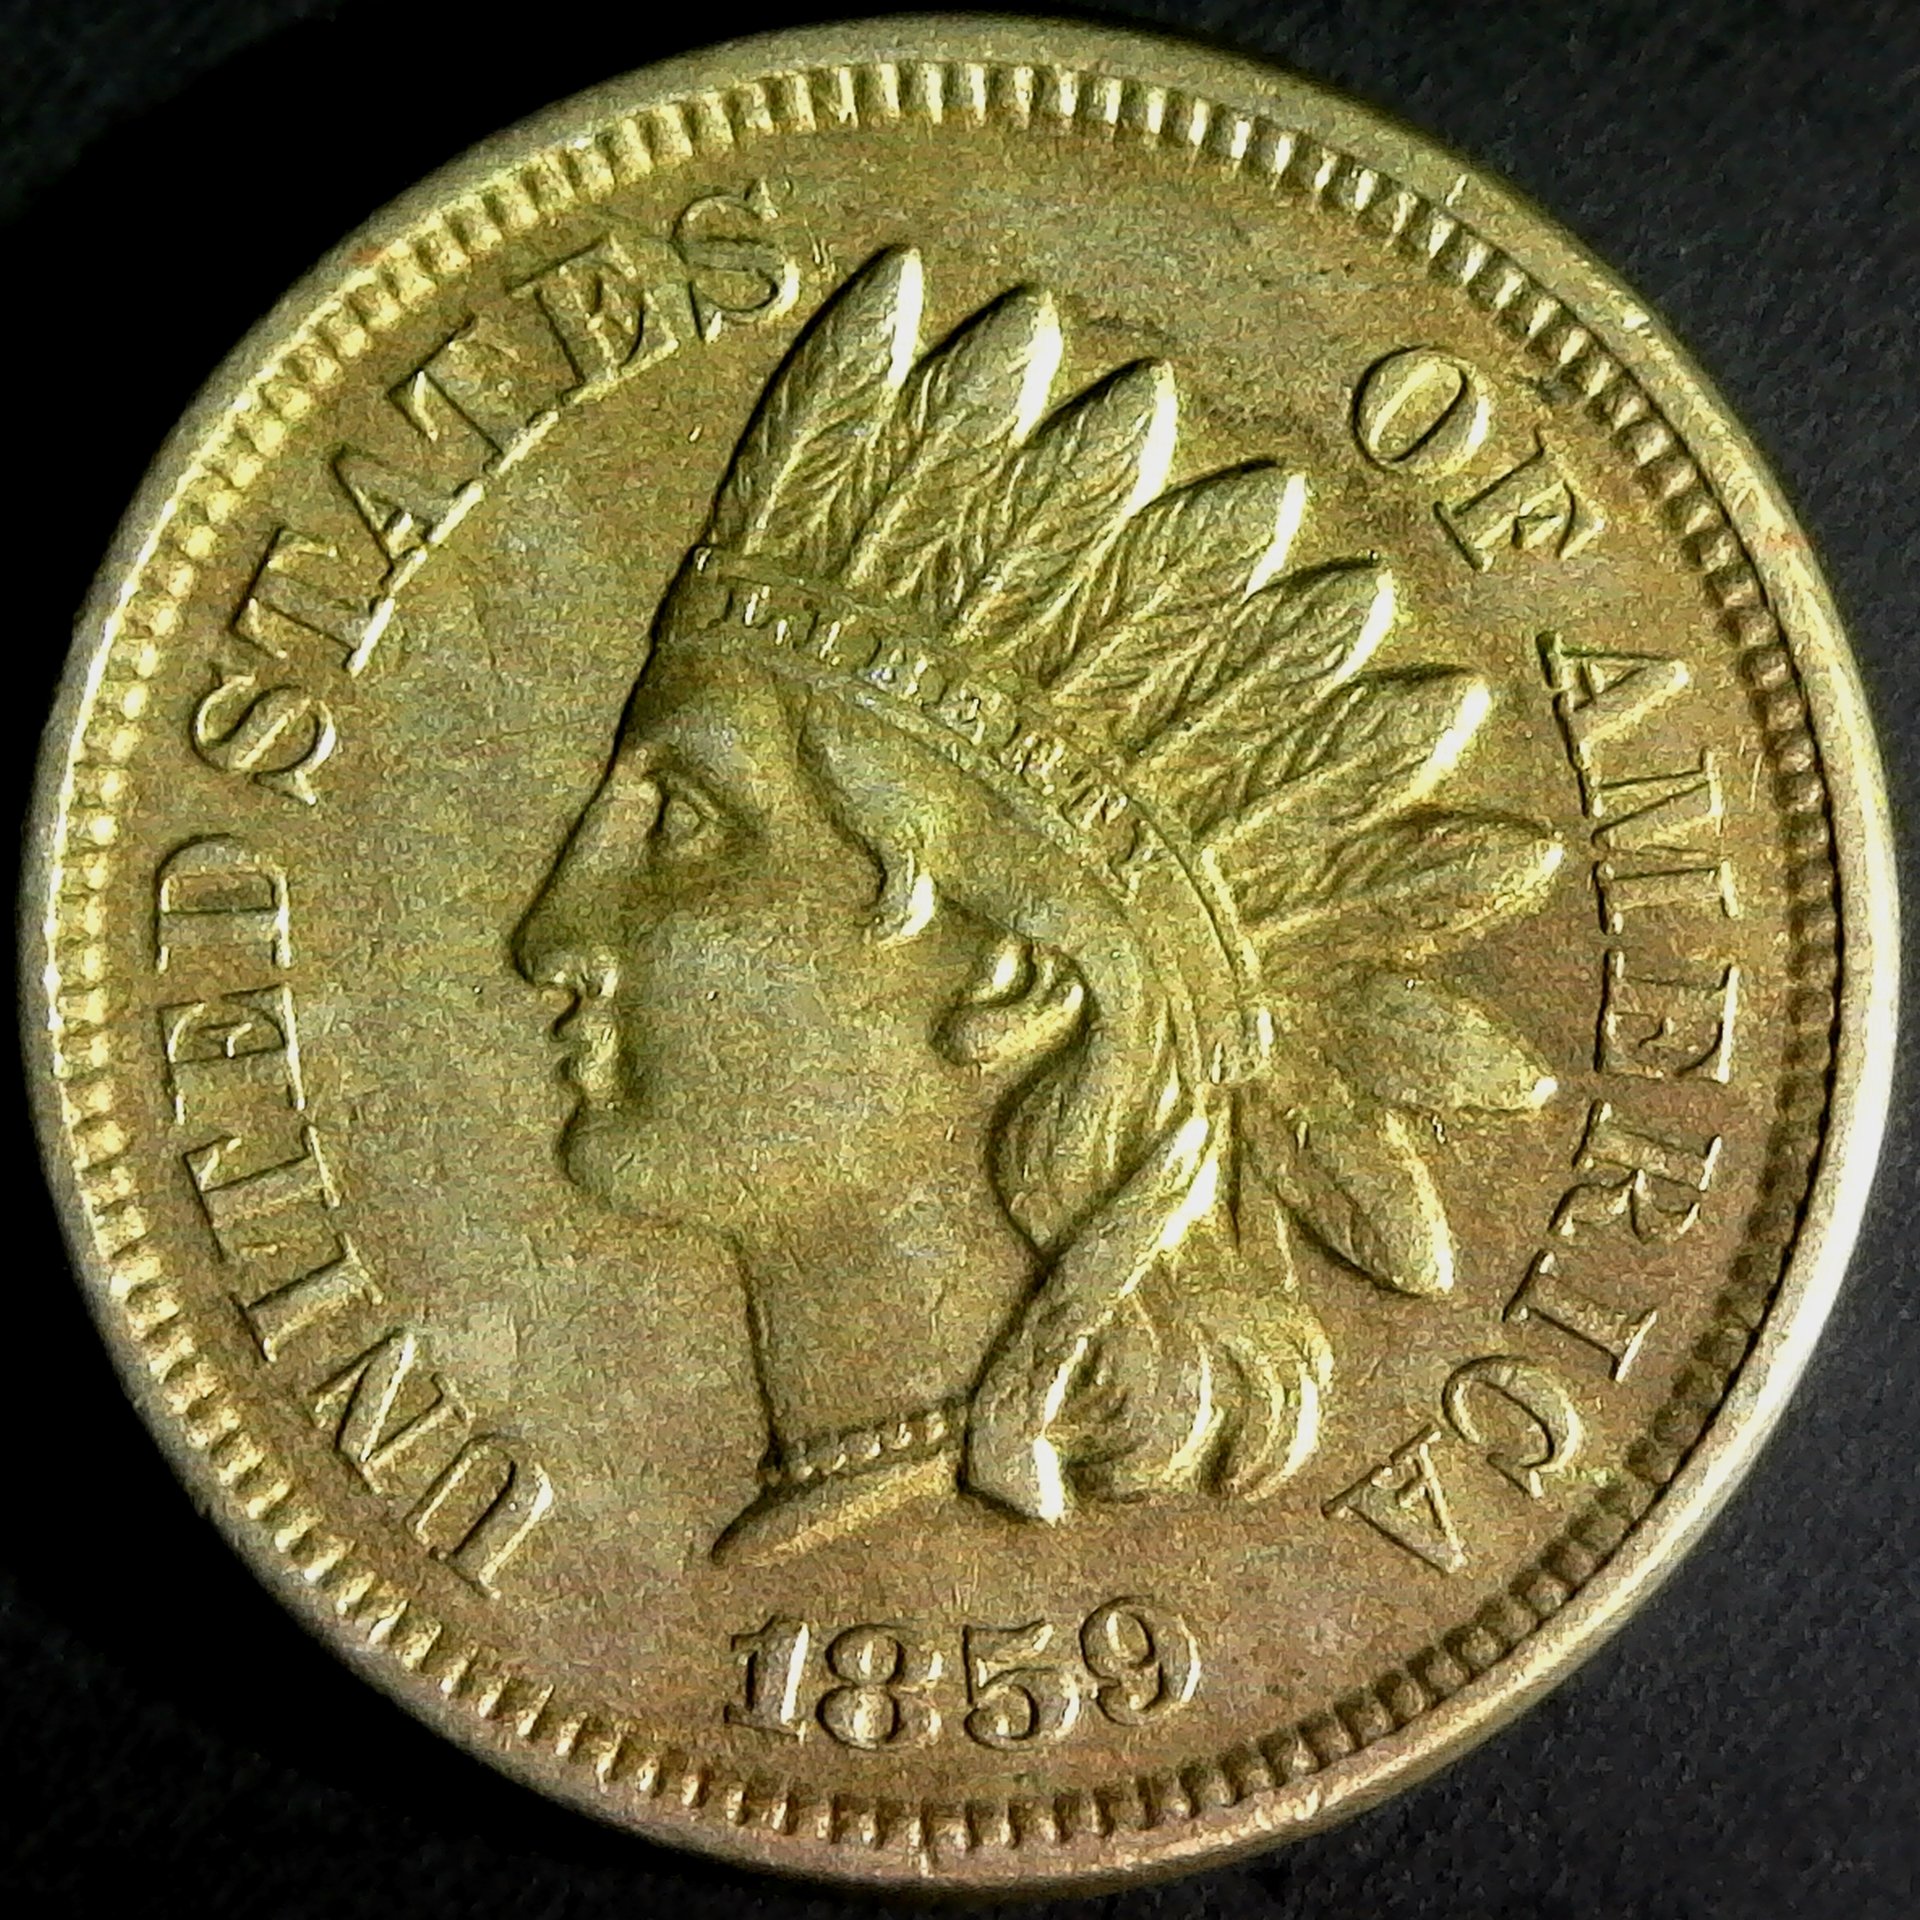 United States One Cent 1859 A obv.jpg